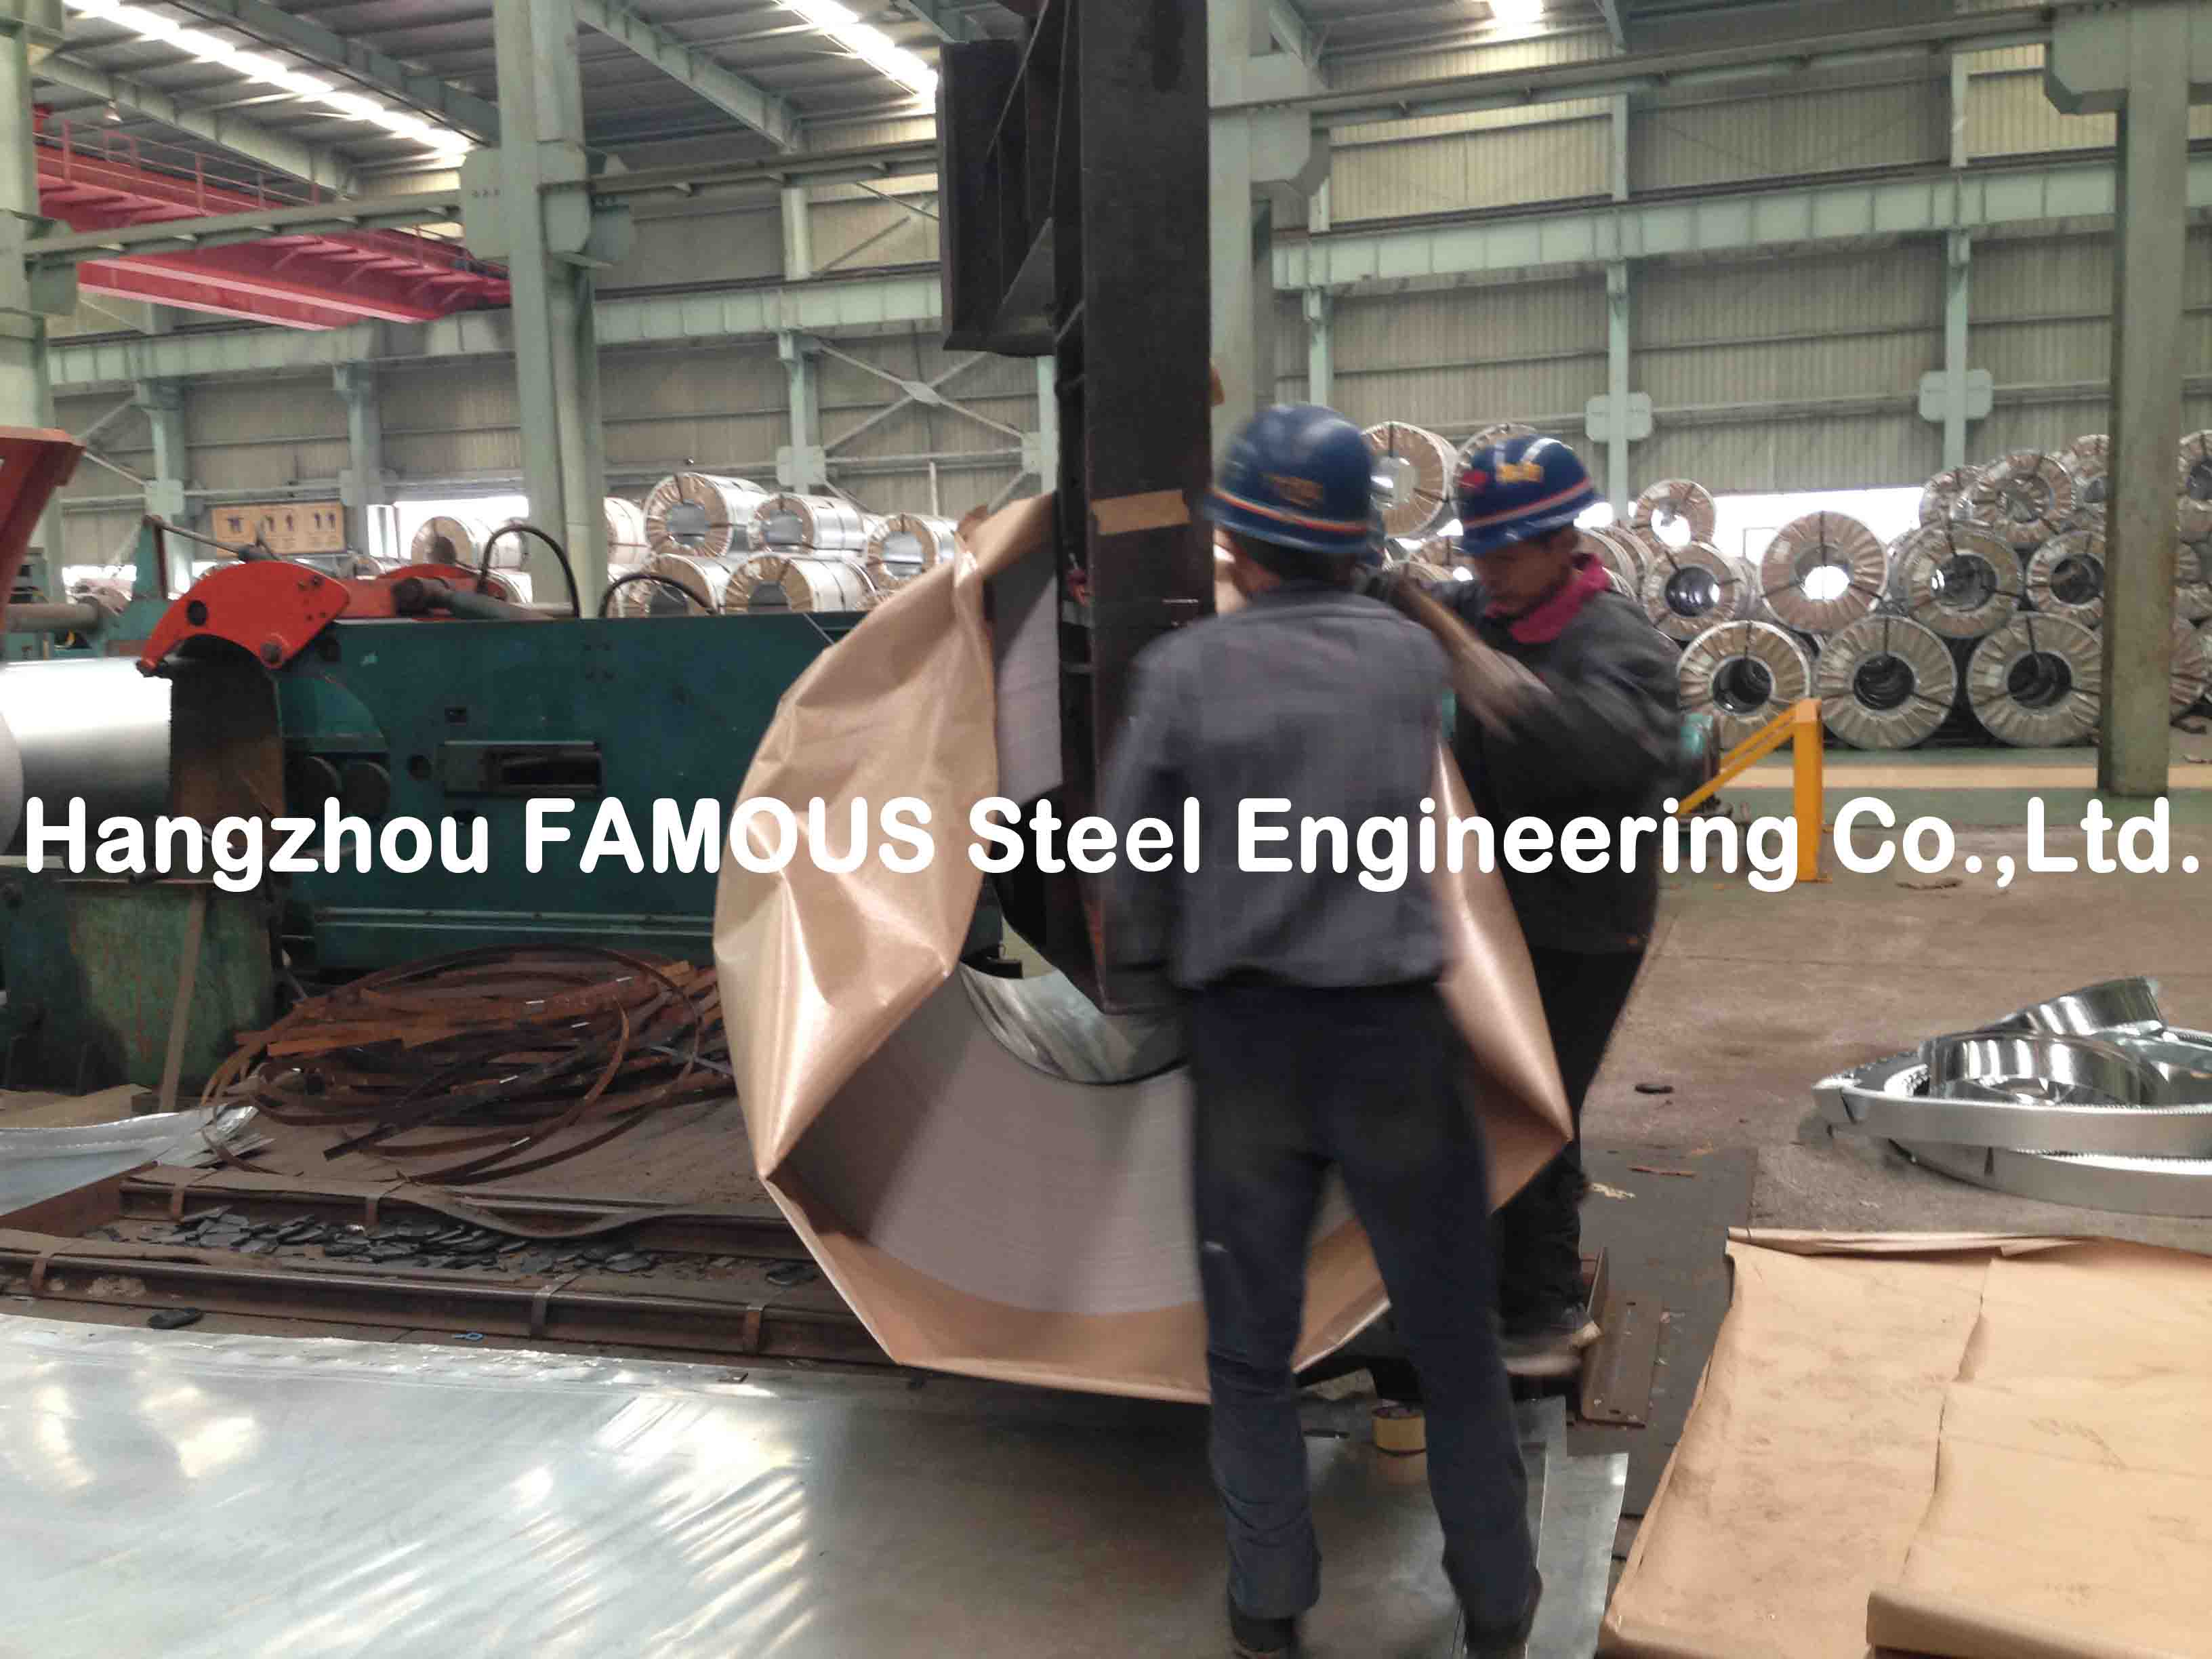 Cold Rolled Galvalume Steel Coil For Steel Building Wall And Roof Cladding Use